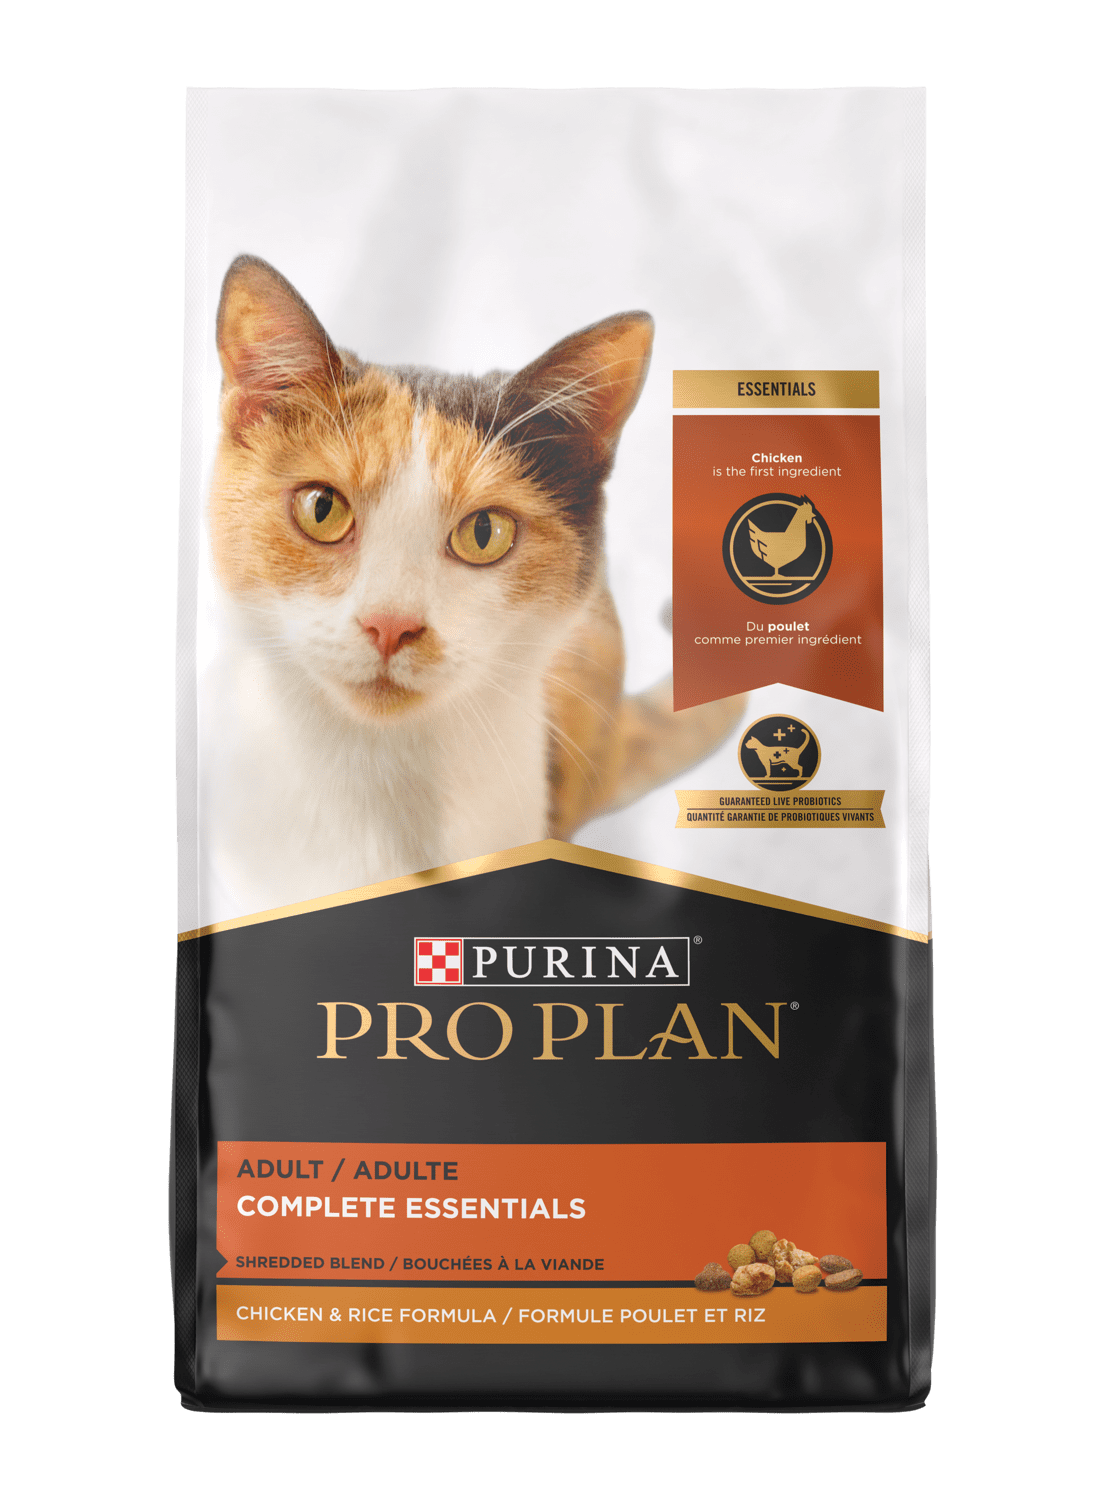 Purina Pro Plan Savor Shredded Blend: Quality Nutrition That Cats Savor in Every Tender Morsel